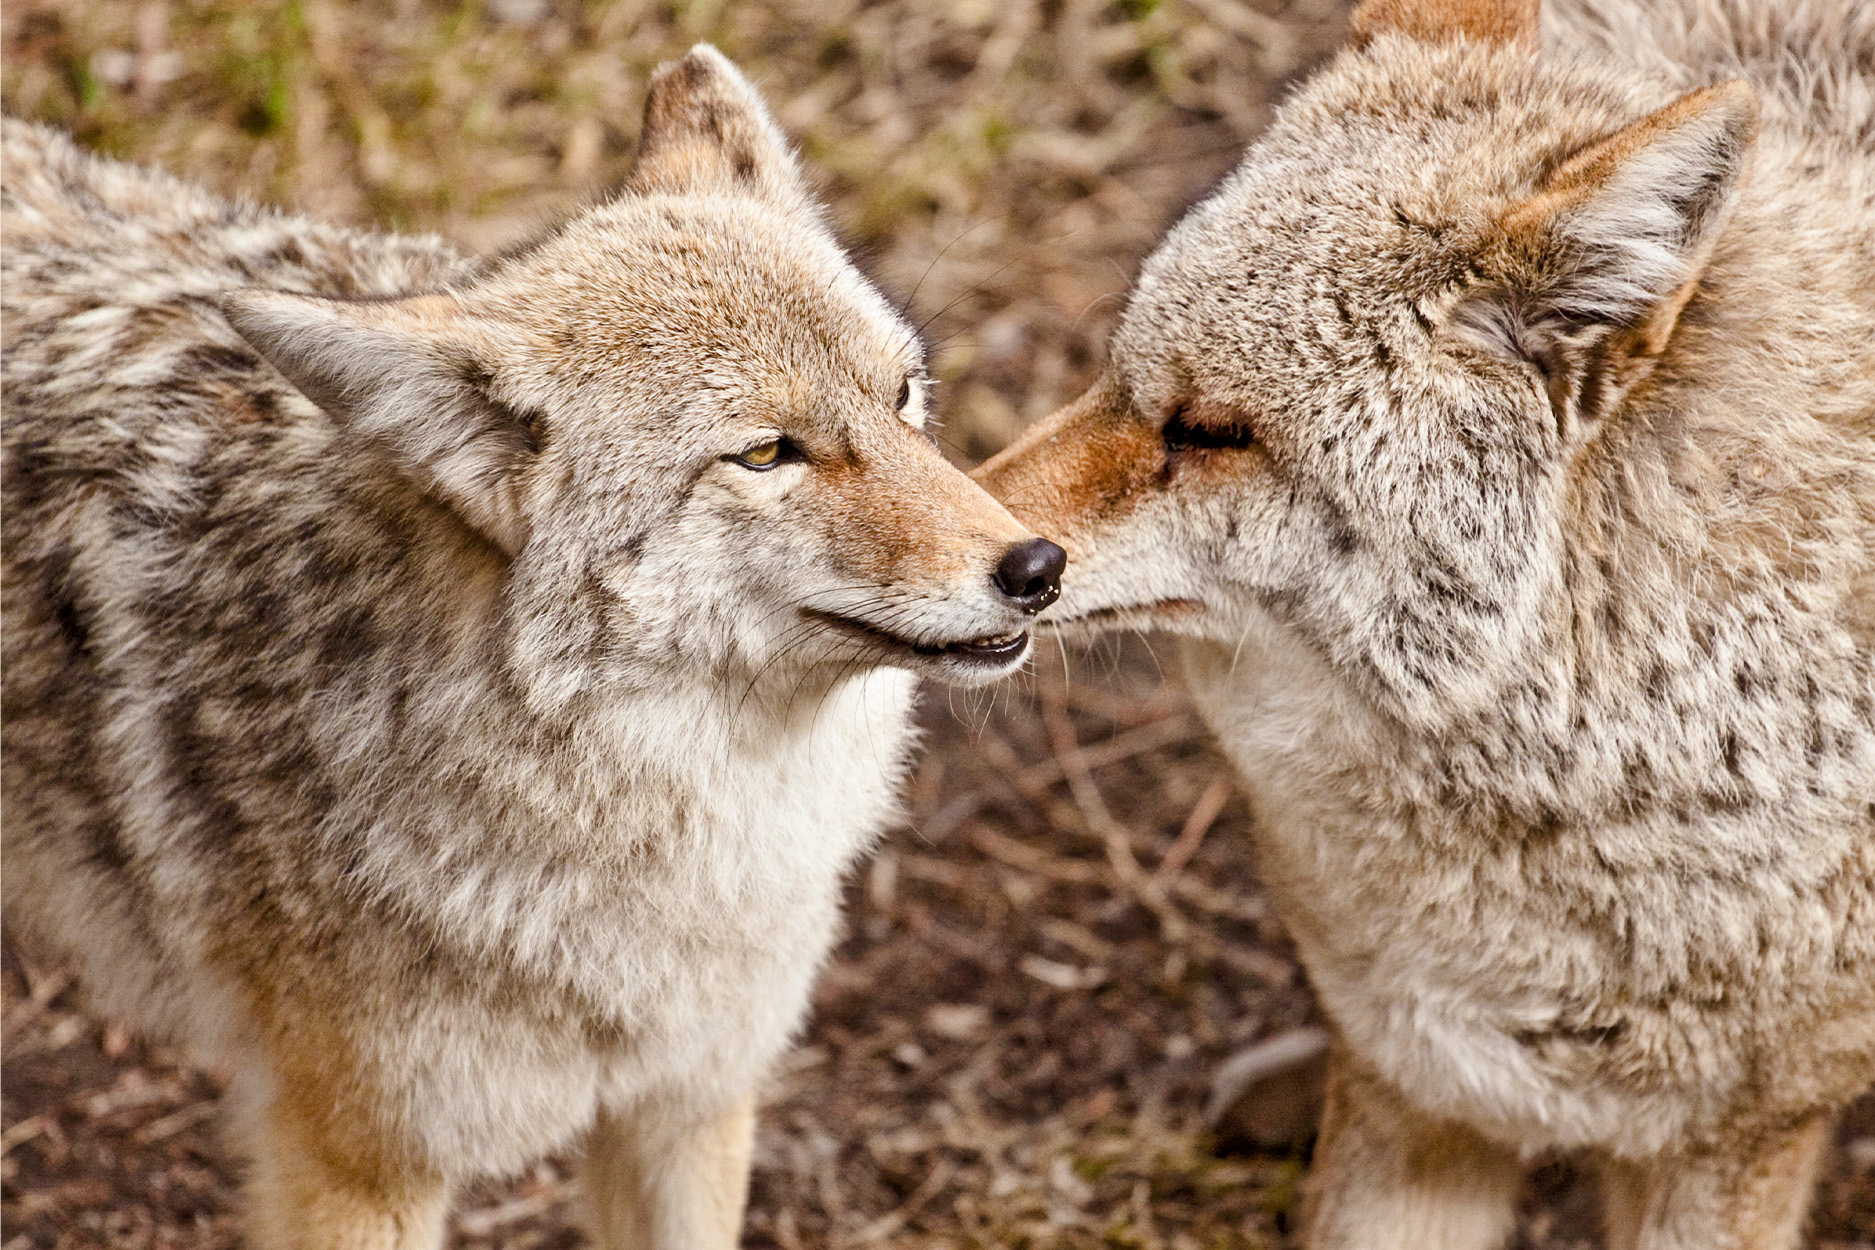 A mating pair of coyotes.